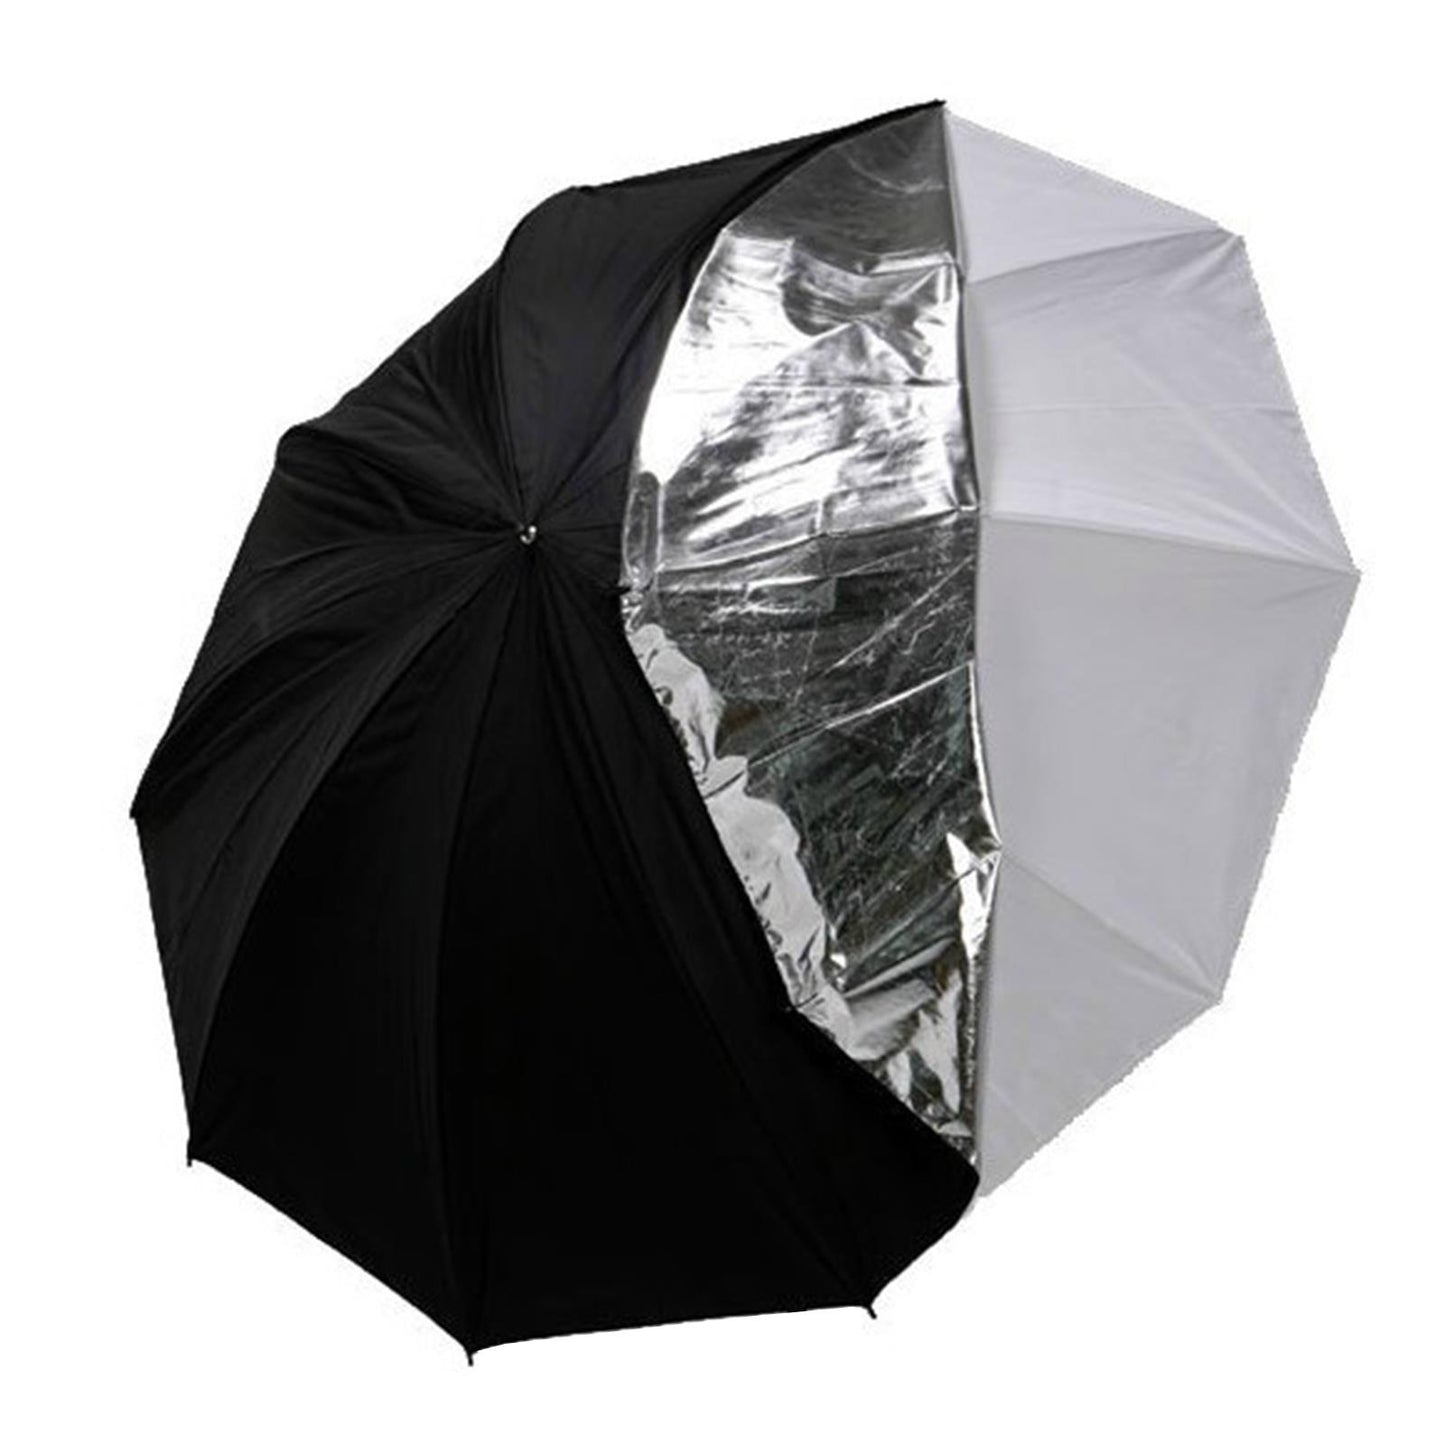 33" (84cm) Professional Umbrella with Detachable Reflector to Change to Diffuser